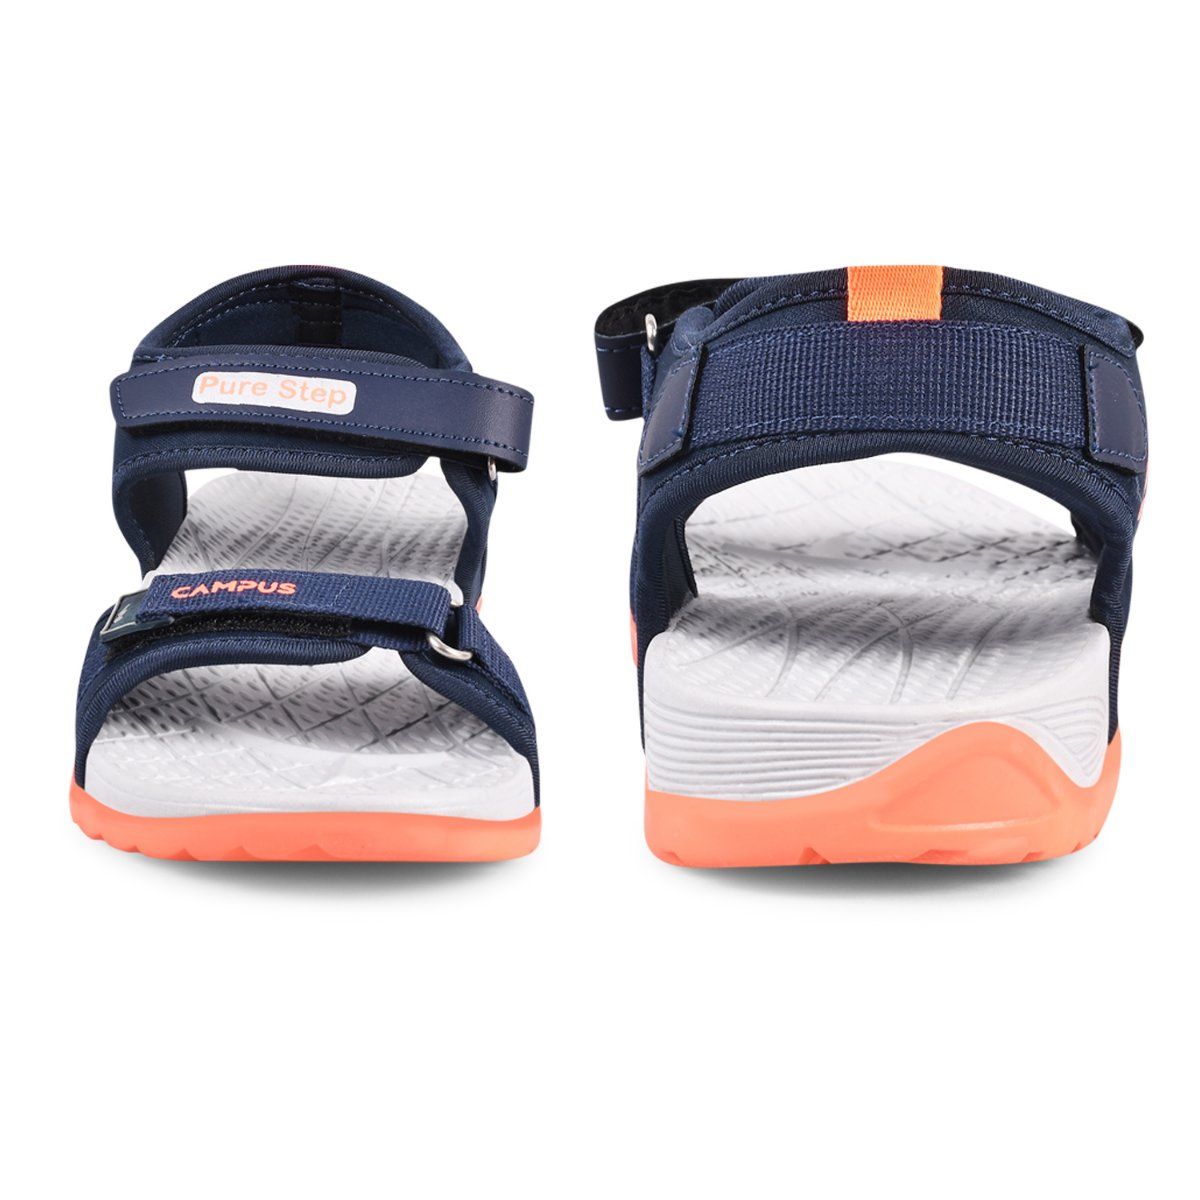 Buy Campus SD-050 Navy Floater Sandals for Men at Best Price @ Tata CLiQ